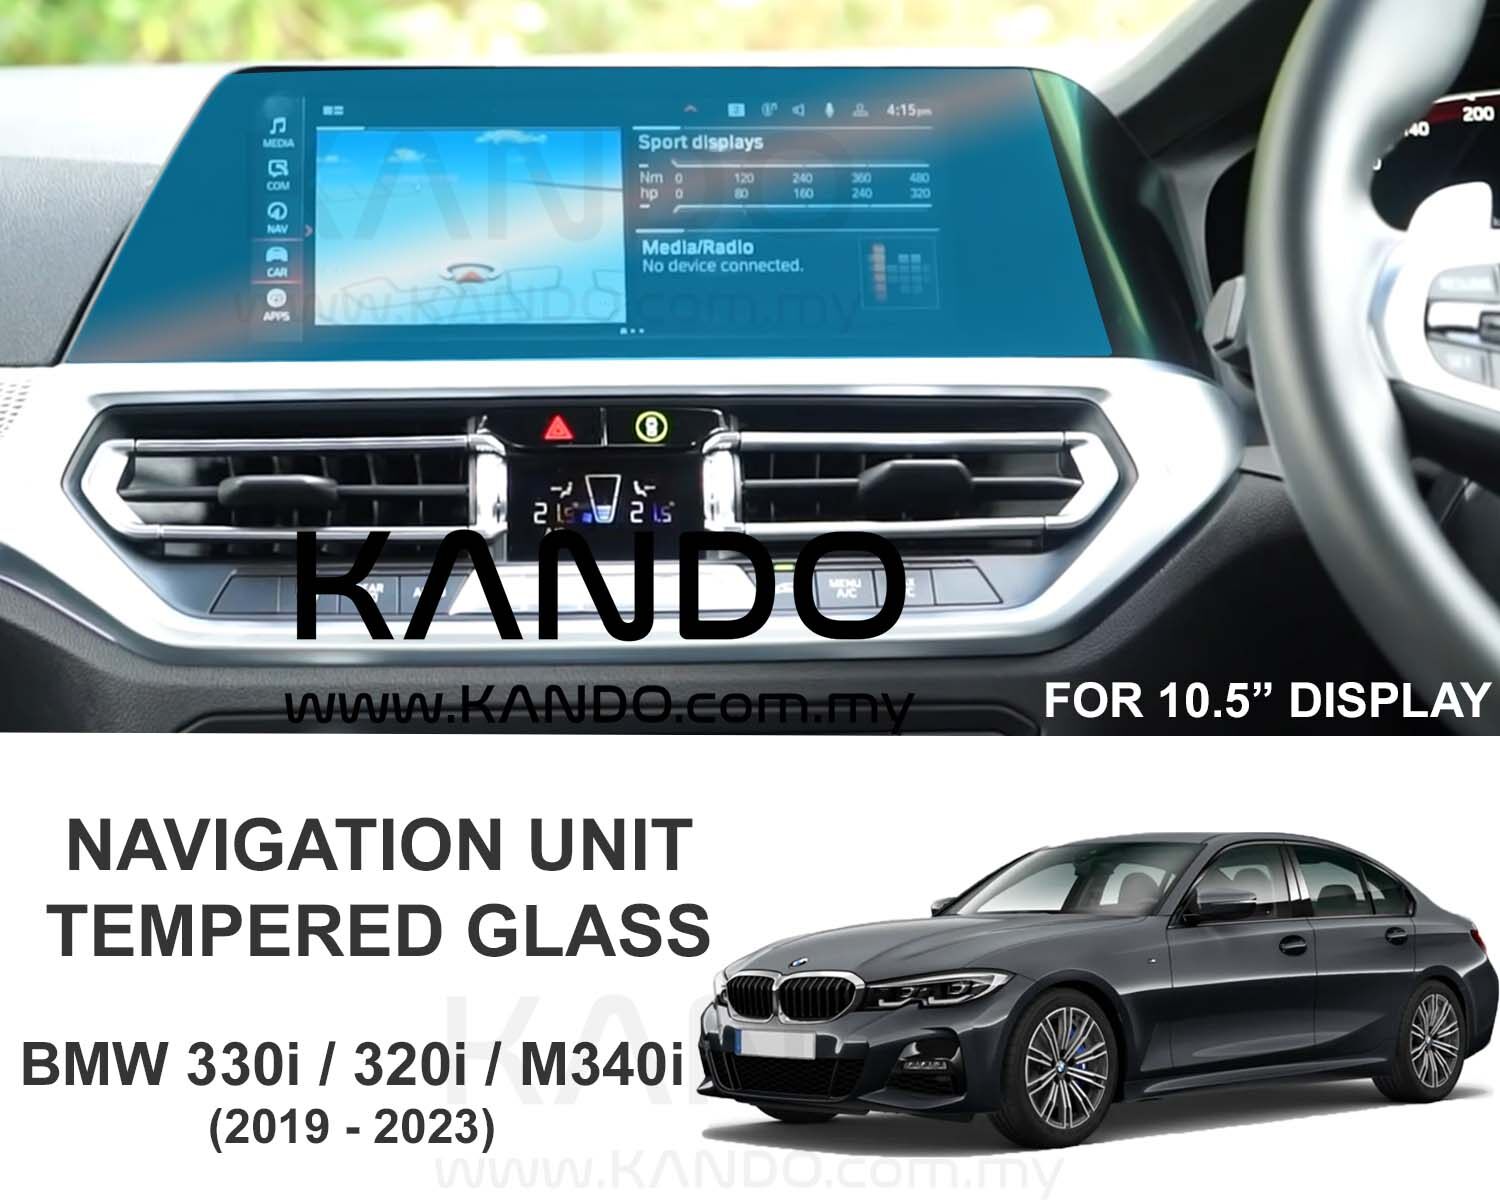 BMW 3 Series Tempered Glass Protector BMW 330i Tempered Glass Protector BMW 330e Tempered Glass Protector BMW M340i Tempered Glass Protector BMW G20 Head Unit Glass BMW 330 GPS Glass Protector BMW G20 Glass Protector